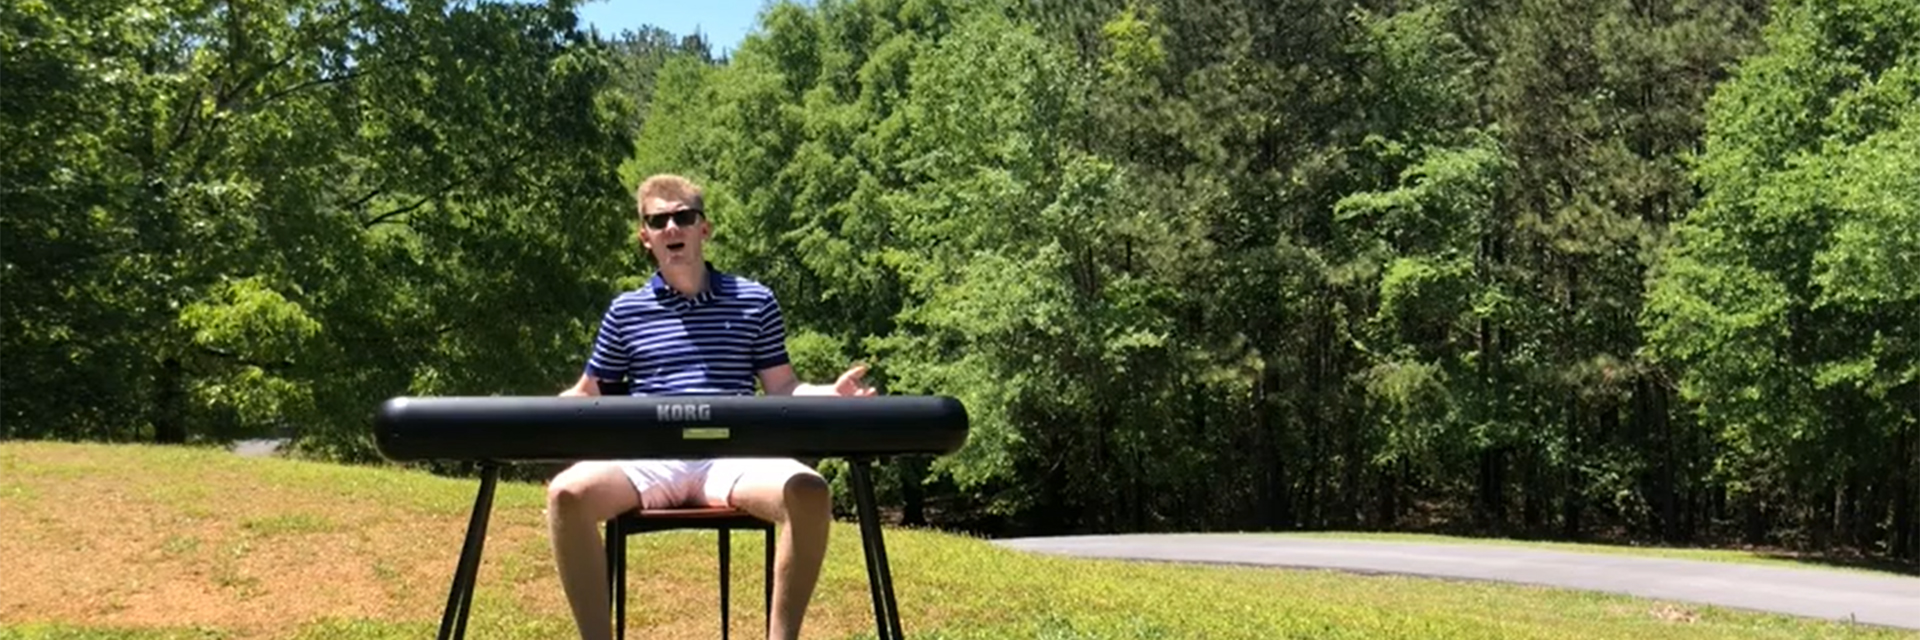 A student playing a keyboard outside on a hill by a country road.